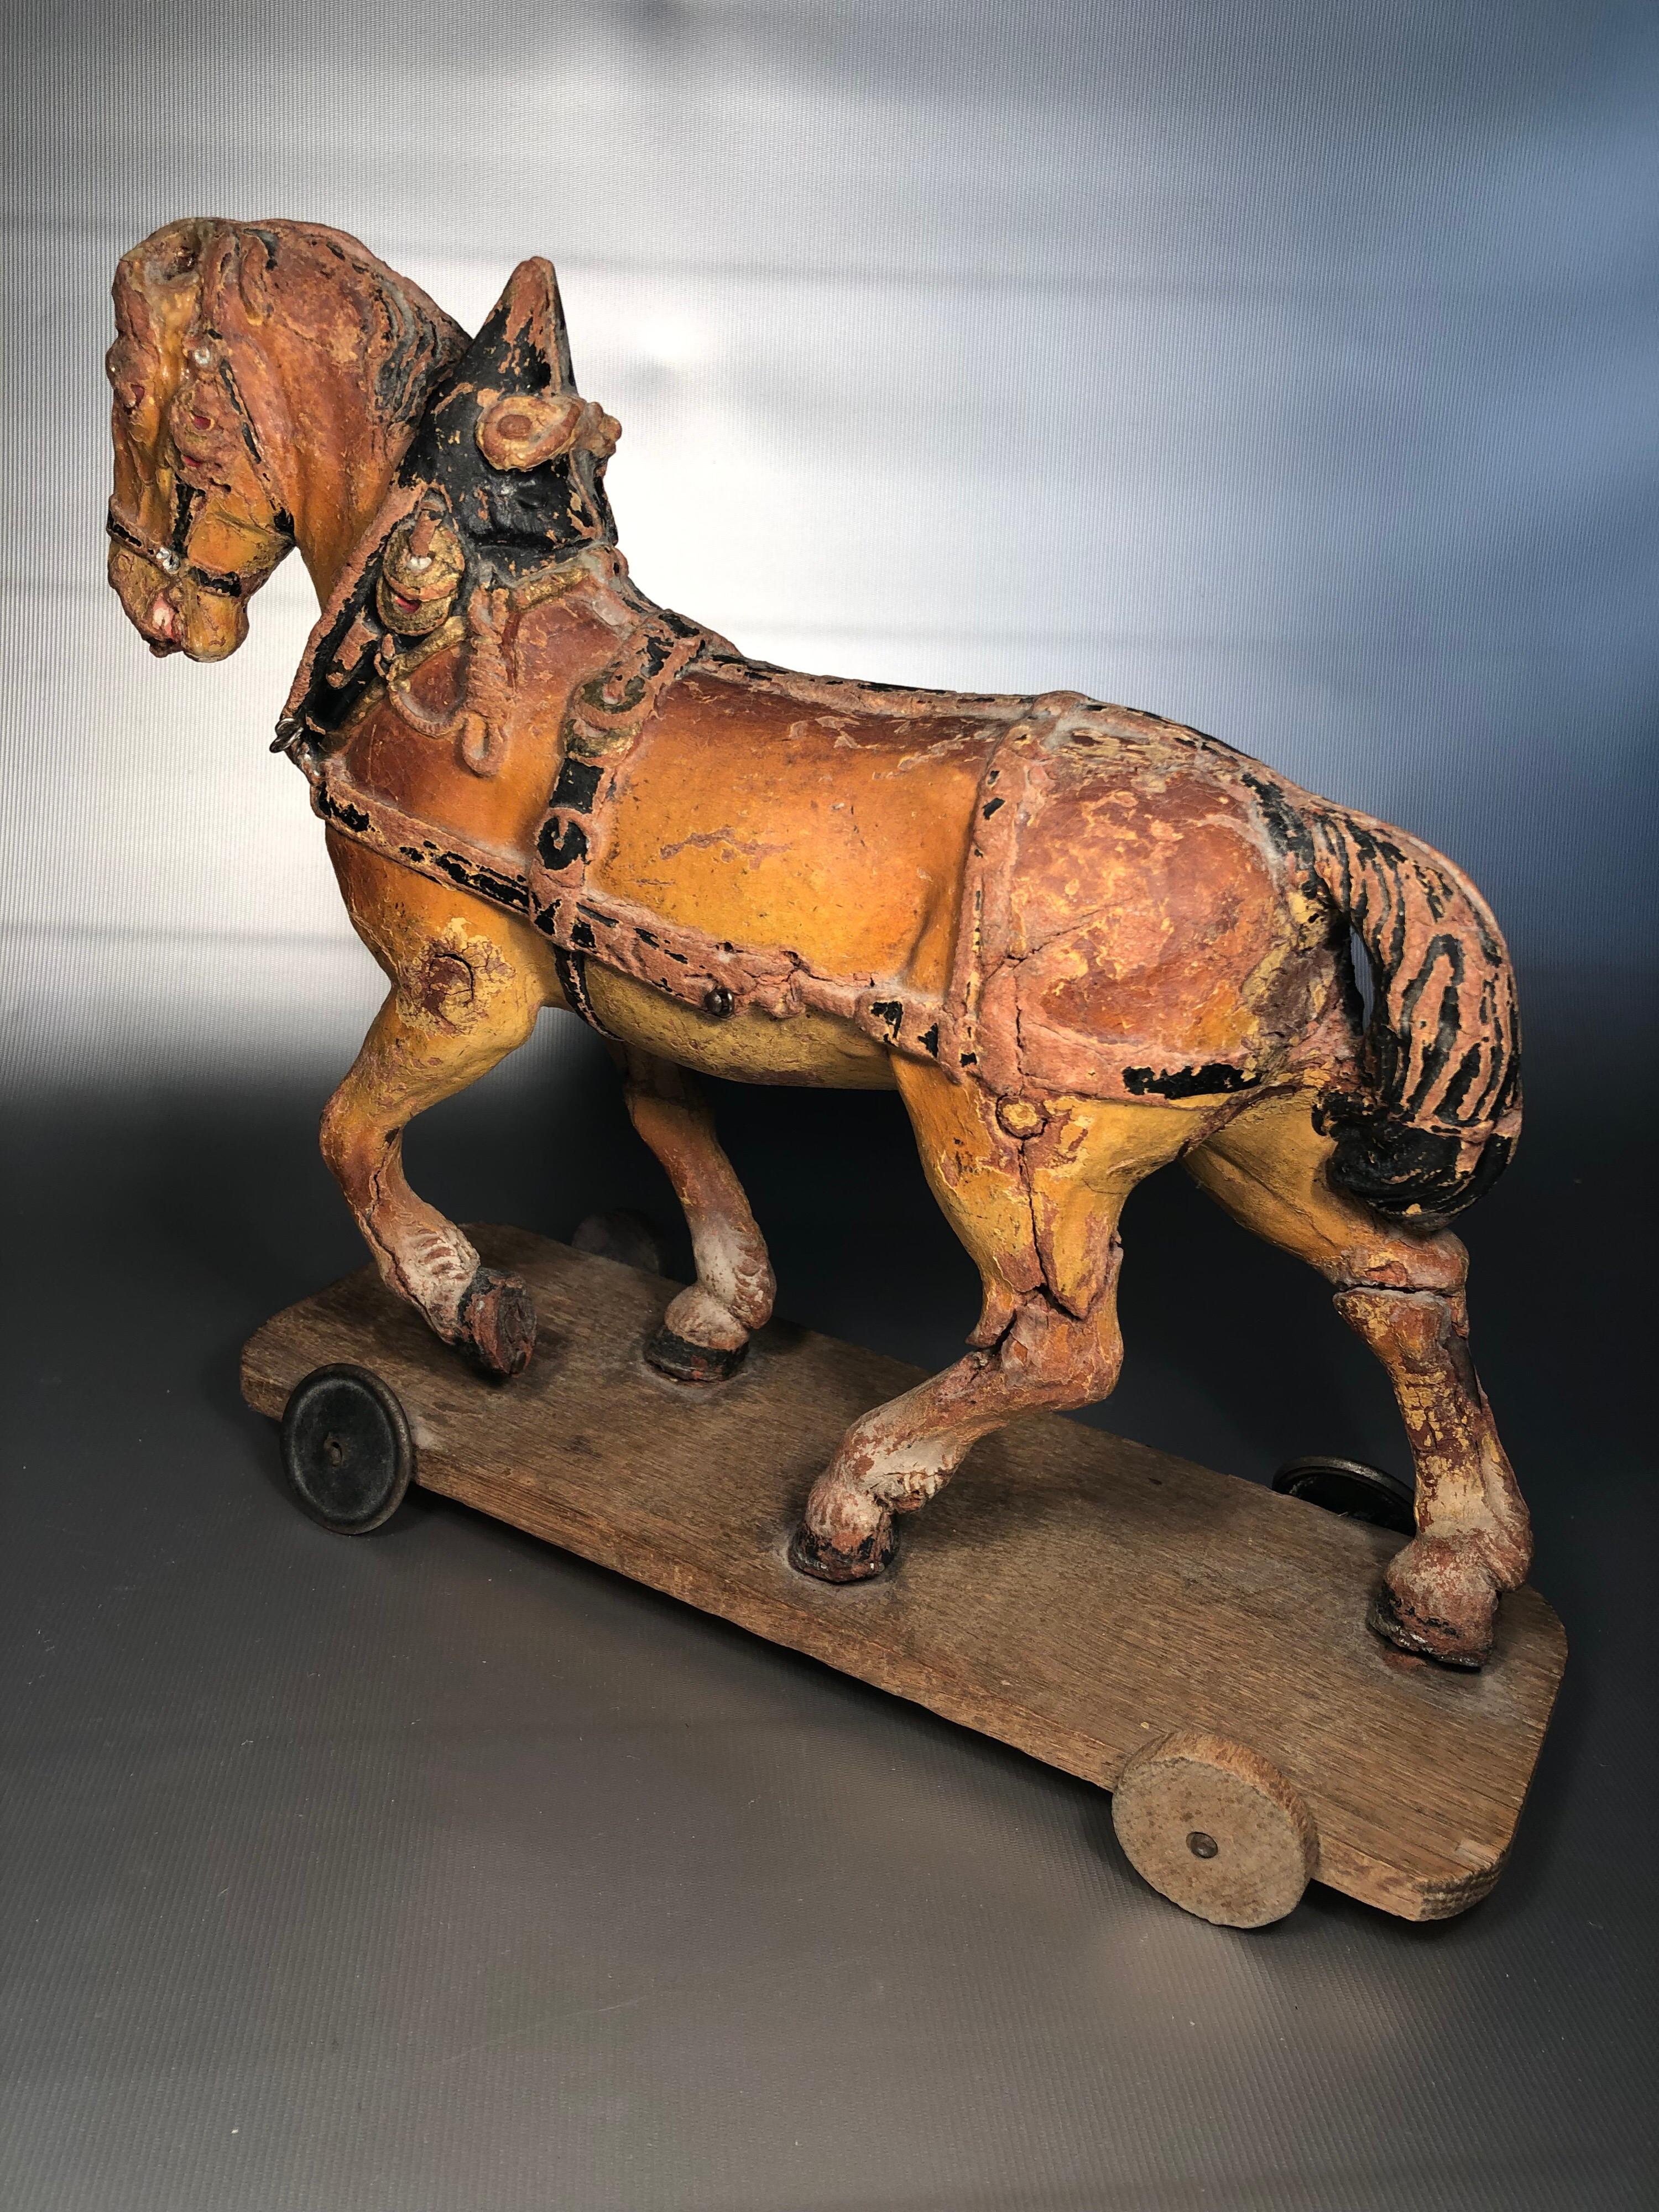 Hand-Carved Antique Wooden Toy Horse, 19th Century ON SALE 